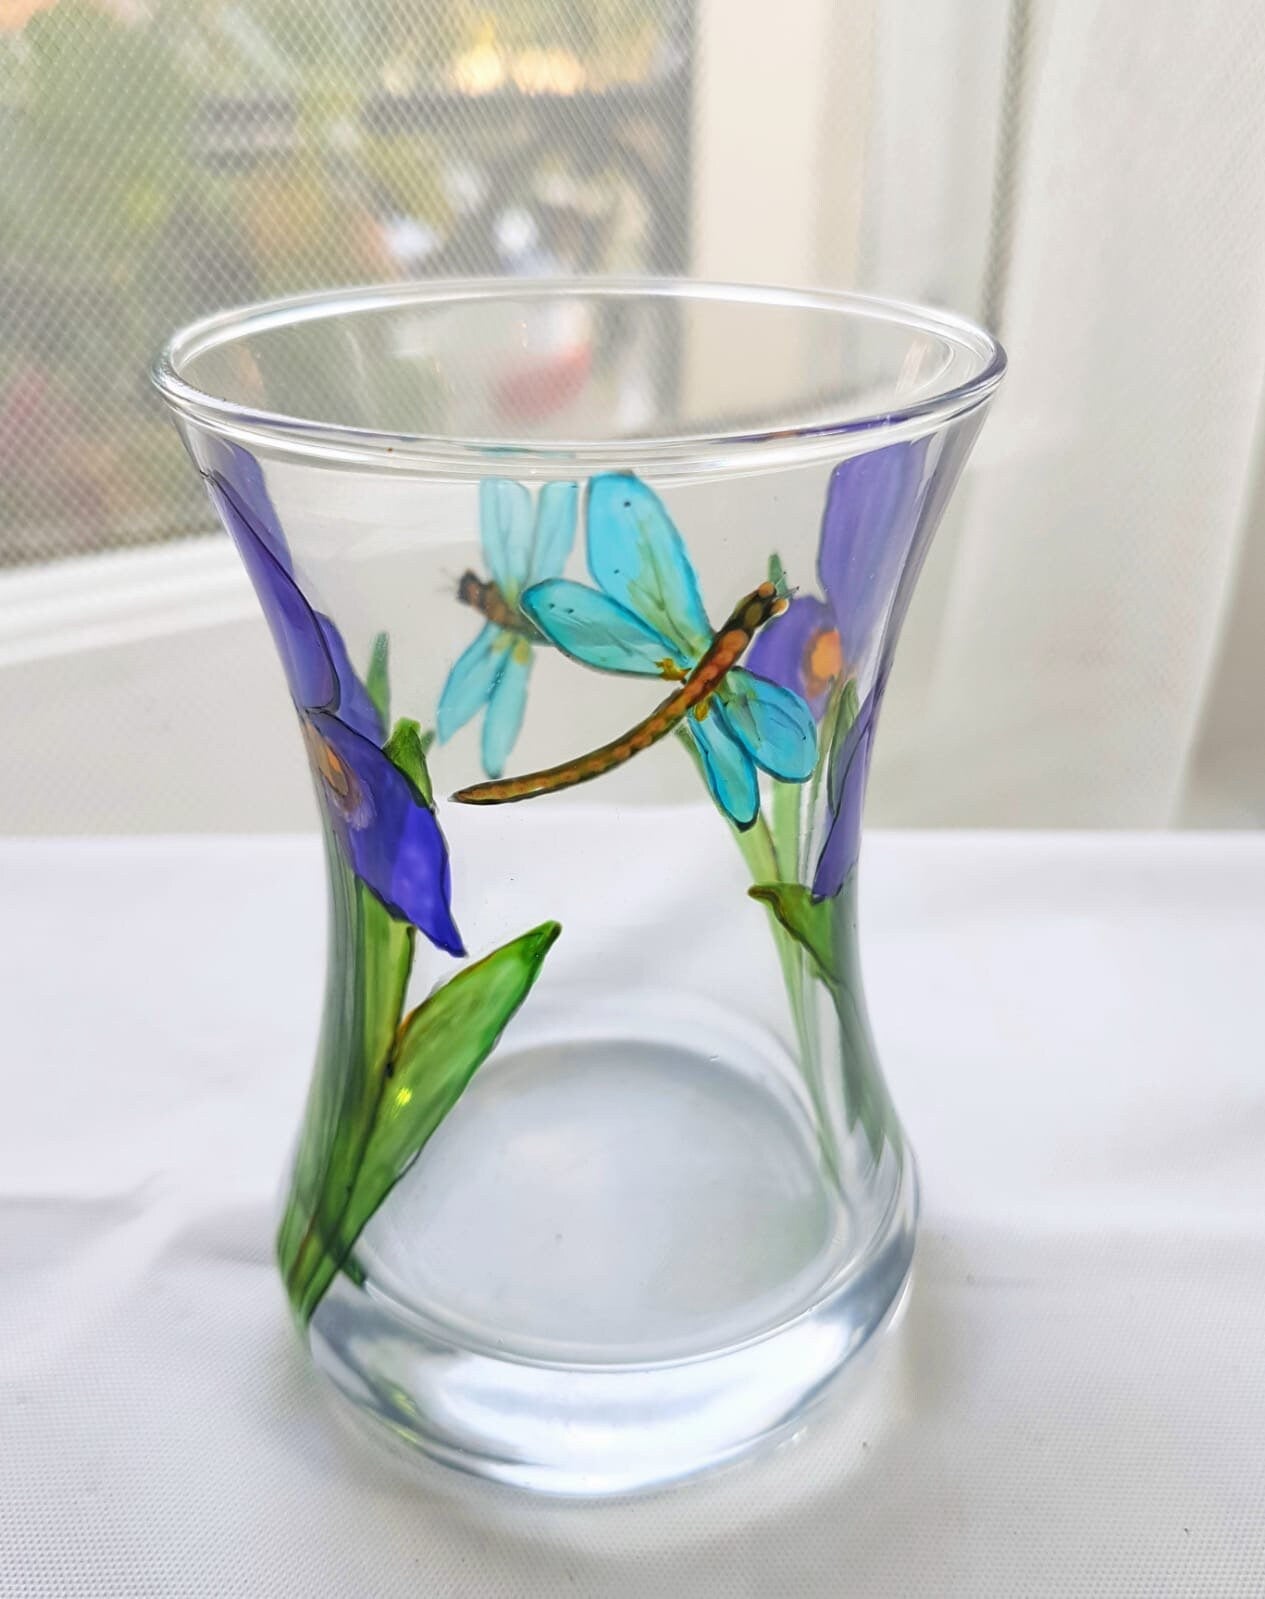 Iris and dragonfly design posey vase